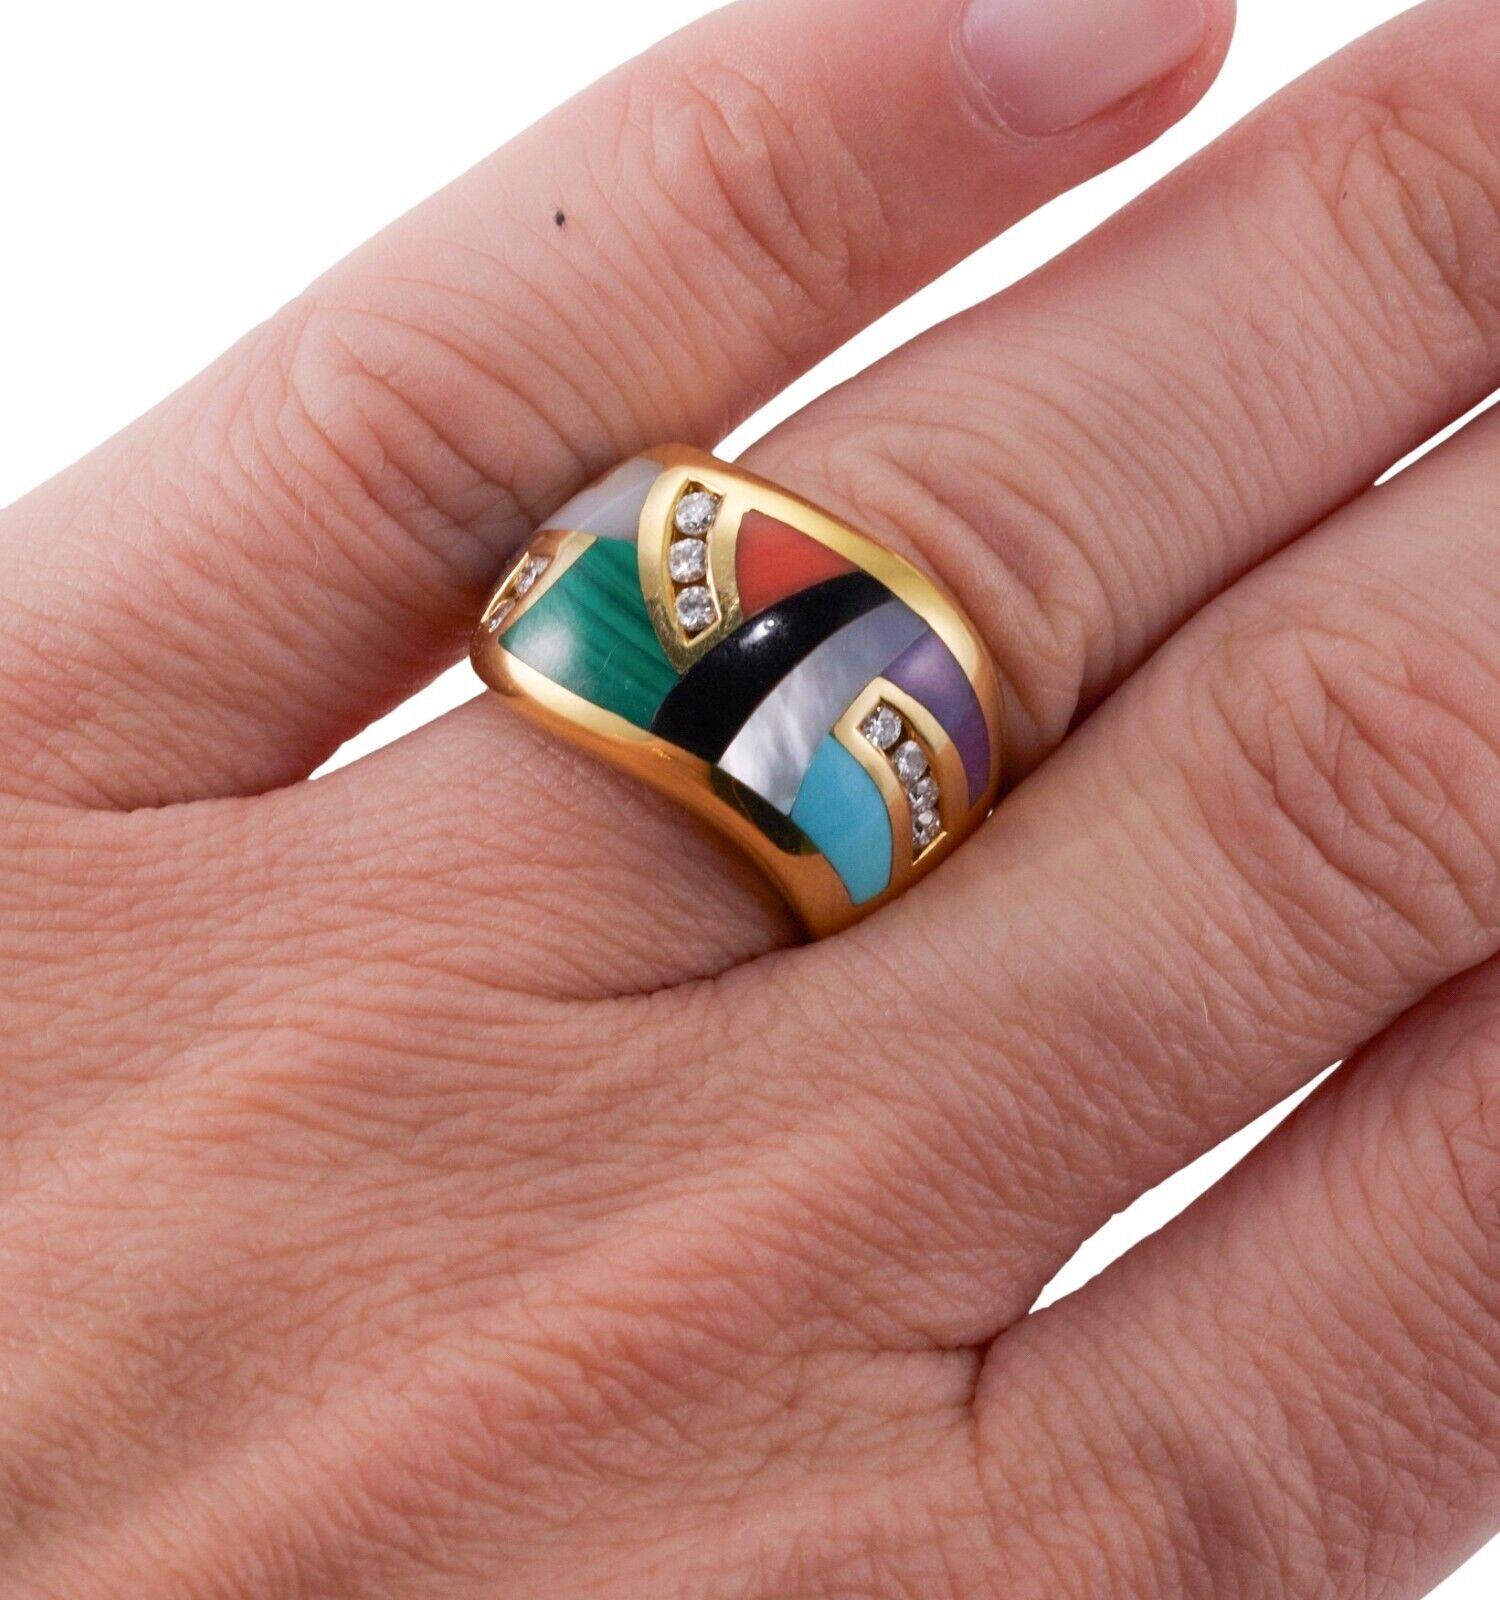 A 14k yellow gold ring set with mother-of-pearl, coral, lapis, malachite, turquoise, purple sugilite and diamonds - approx. 0.31ctw. Ring Size 6.25, 14mm Wide. 12.7 grams.